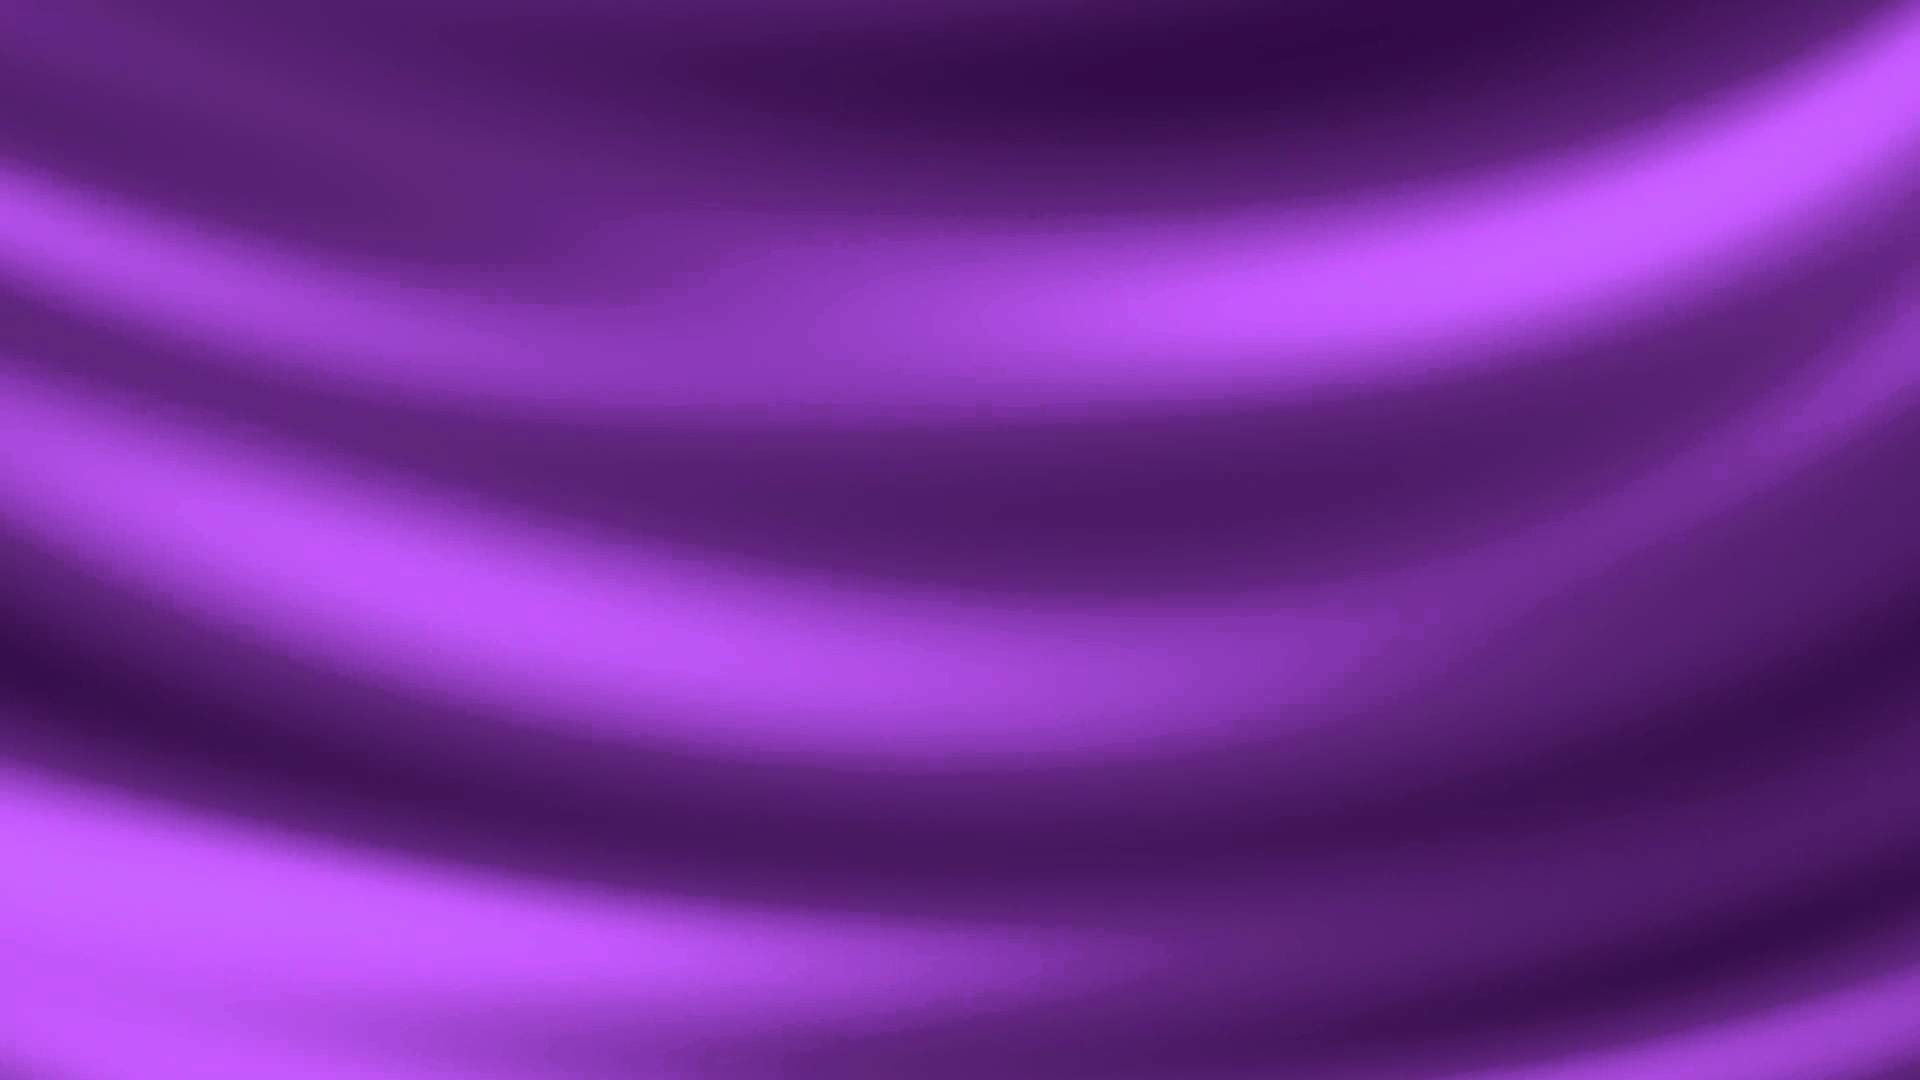 1920x1080 Free Stock Video Download - Purple Rippling Abstract Motion Background Loop  - YouTube